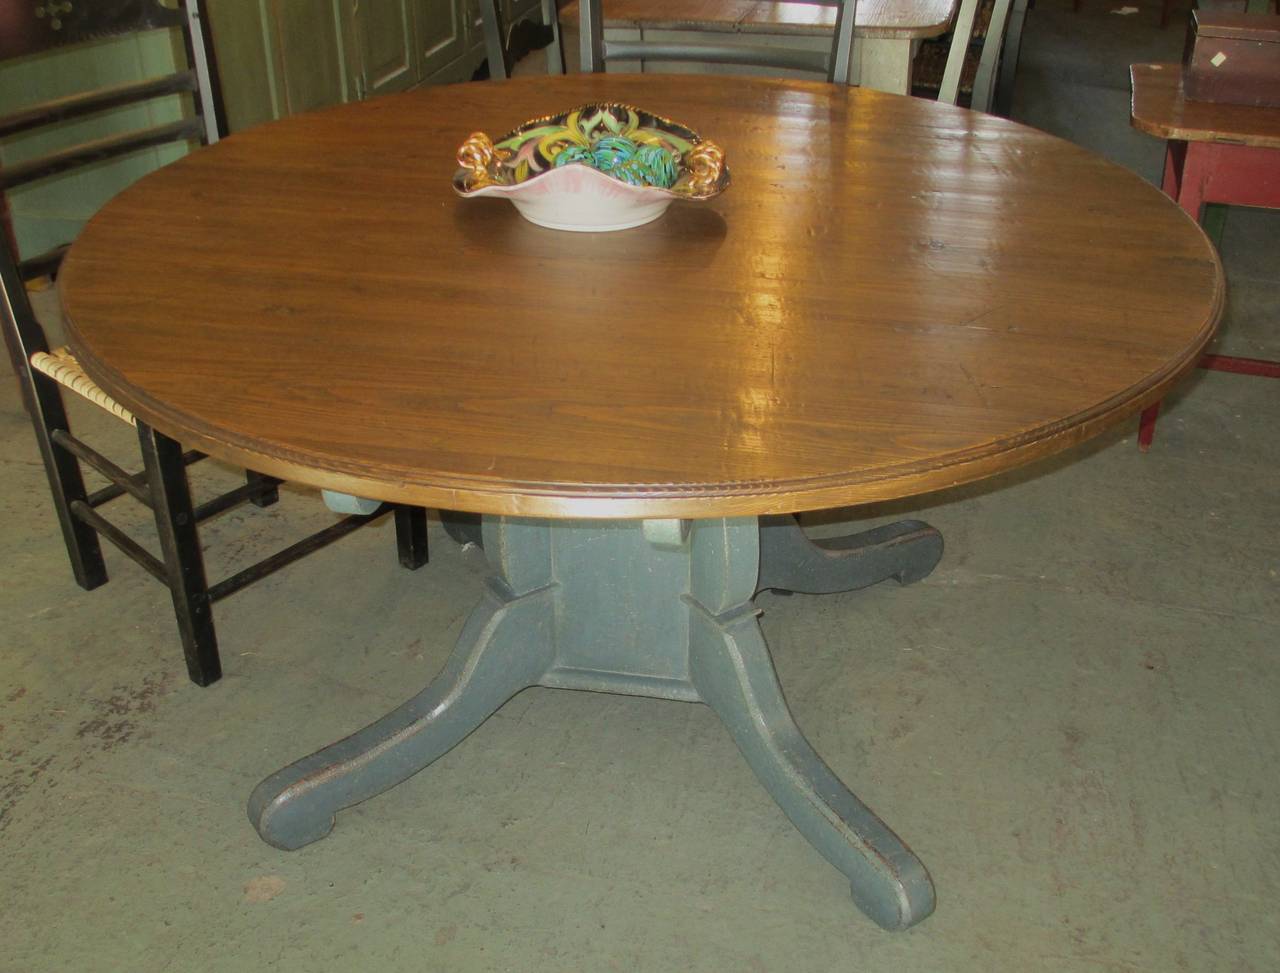 French Provincial Round Pedestal Dining Table From Quebec